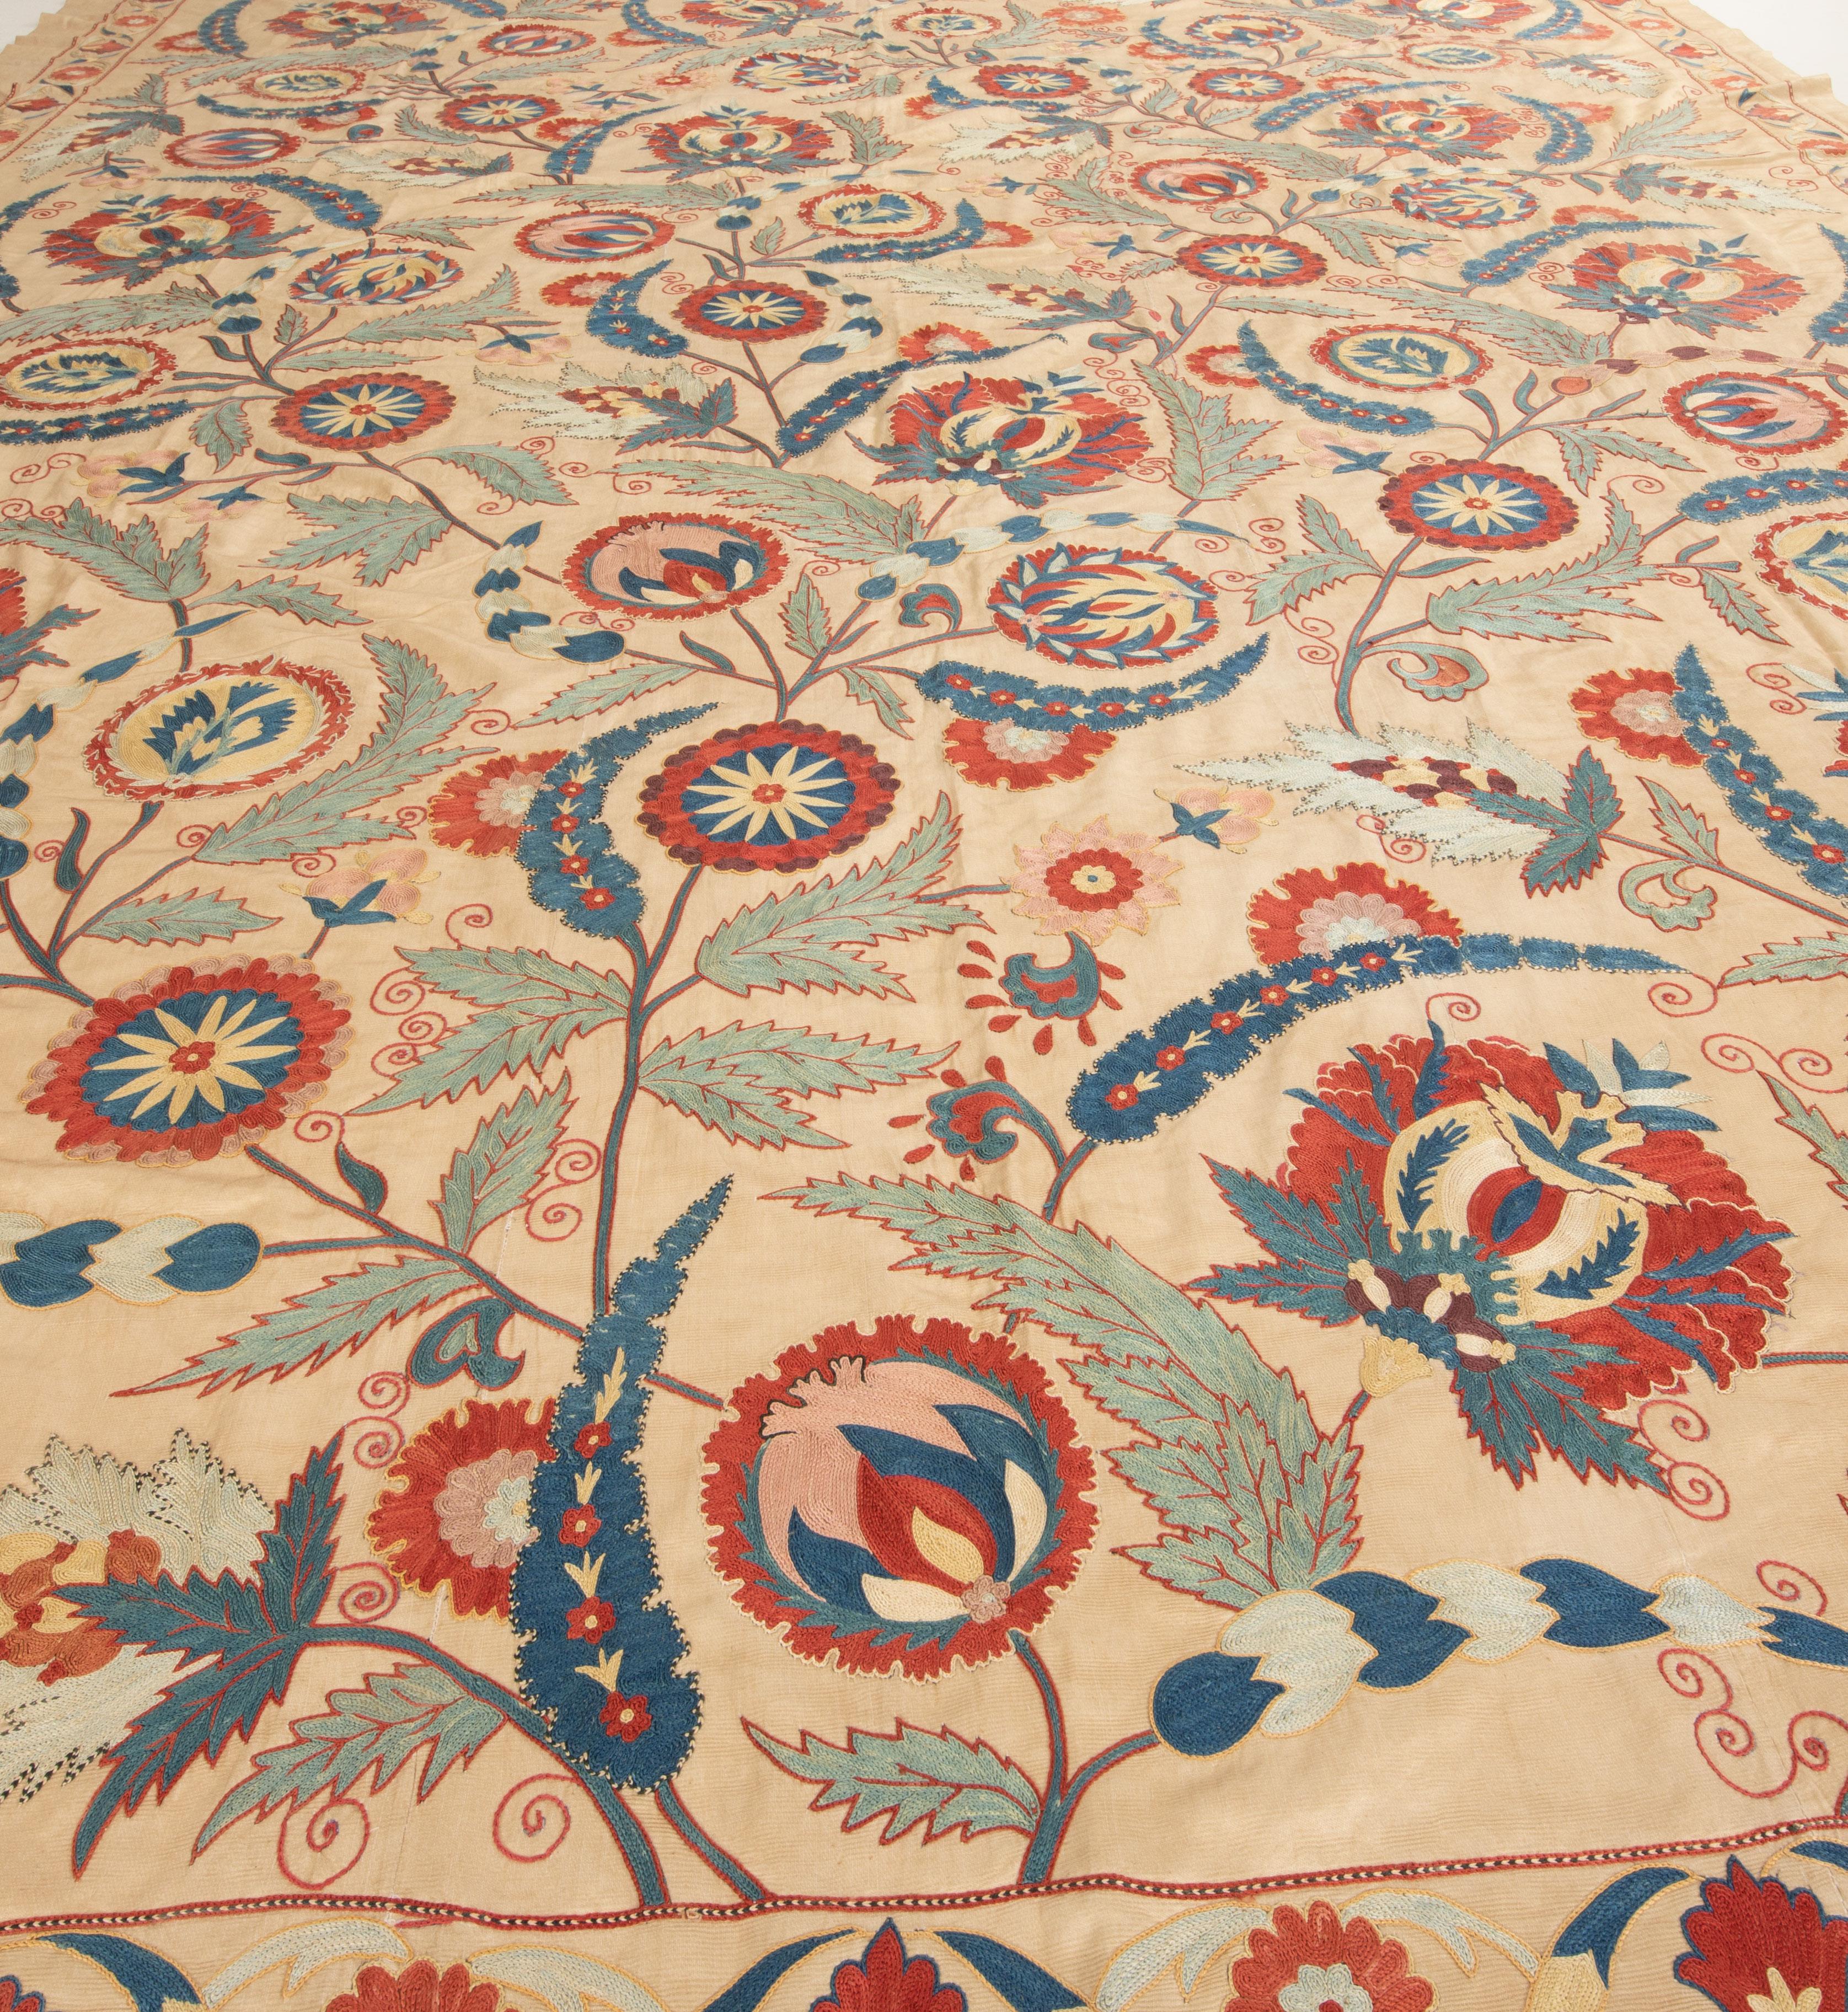 Contemporary Large Suzani Done in the Style of Ottoman Embroidery, Uzbekistan For Sale 6